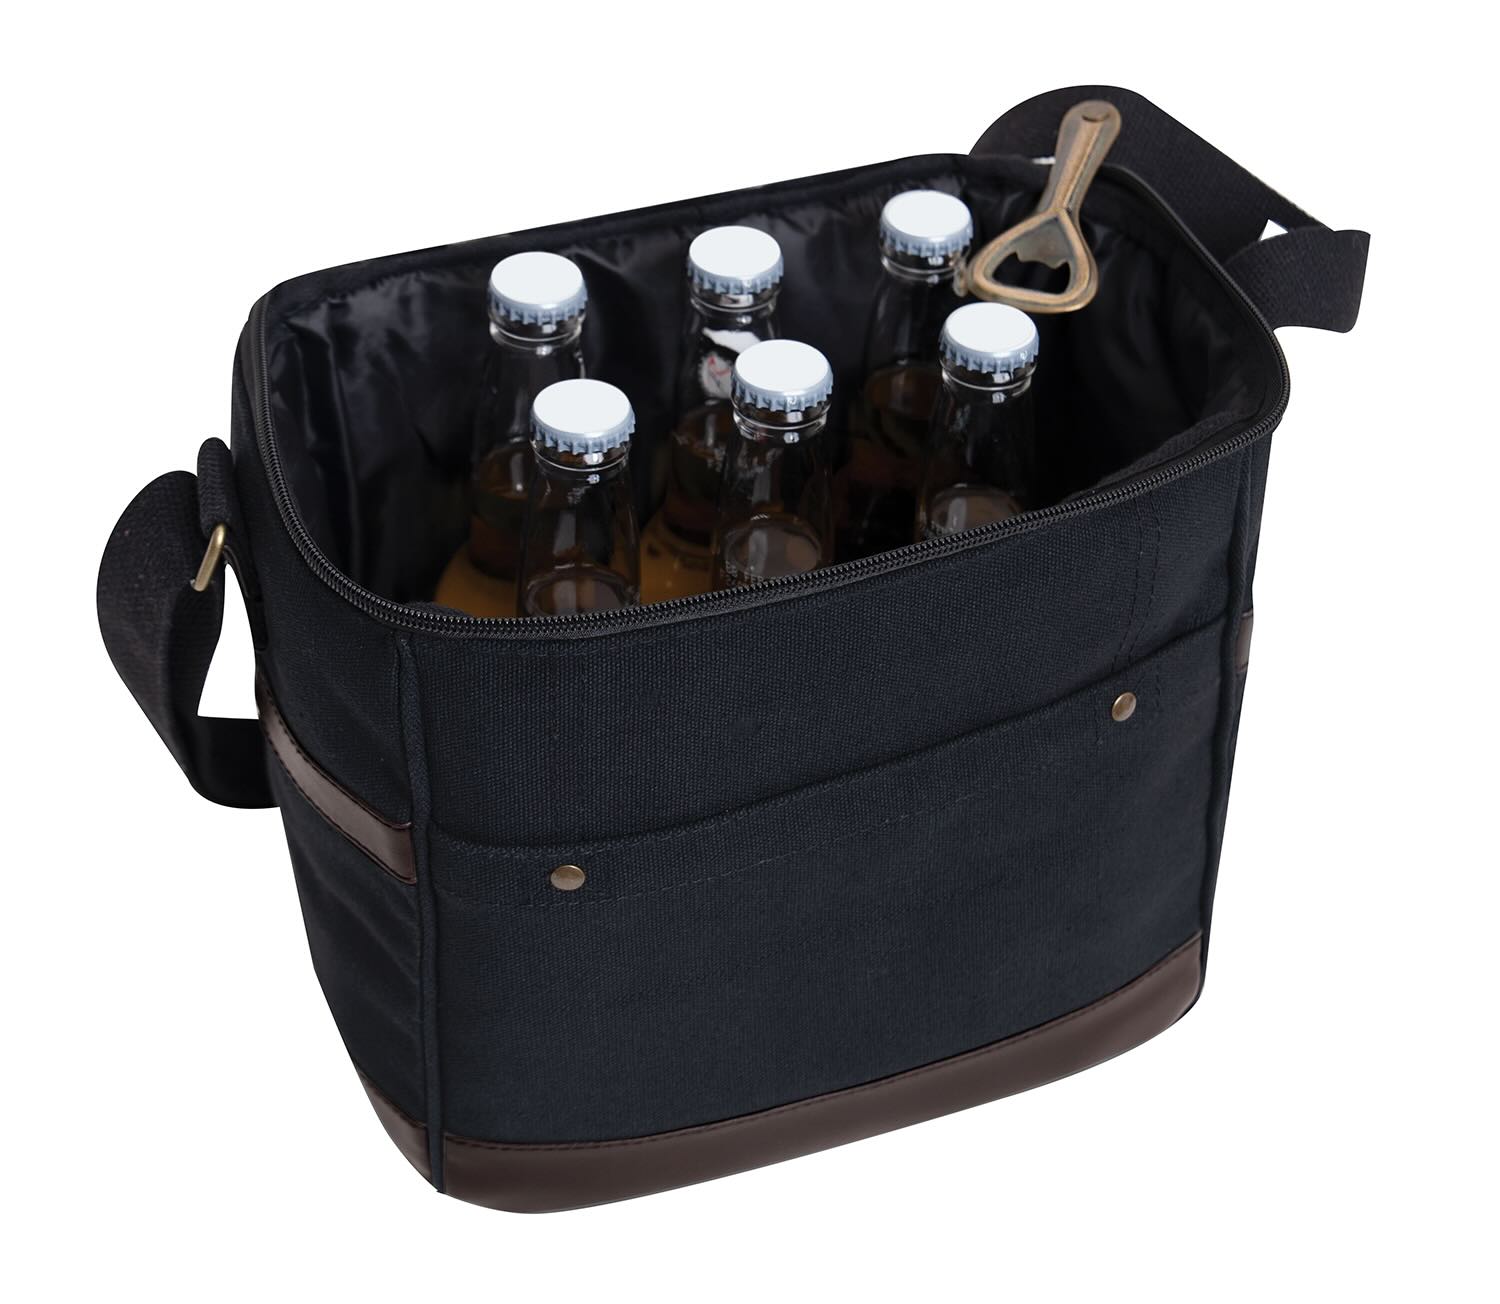 Coolers & Drinkware - Rothco Canvas Insulated Cooler Bag